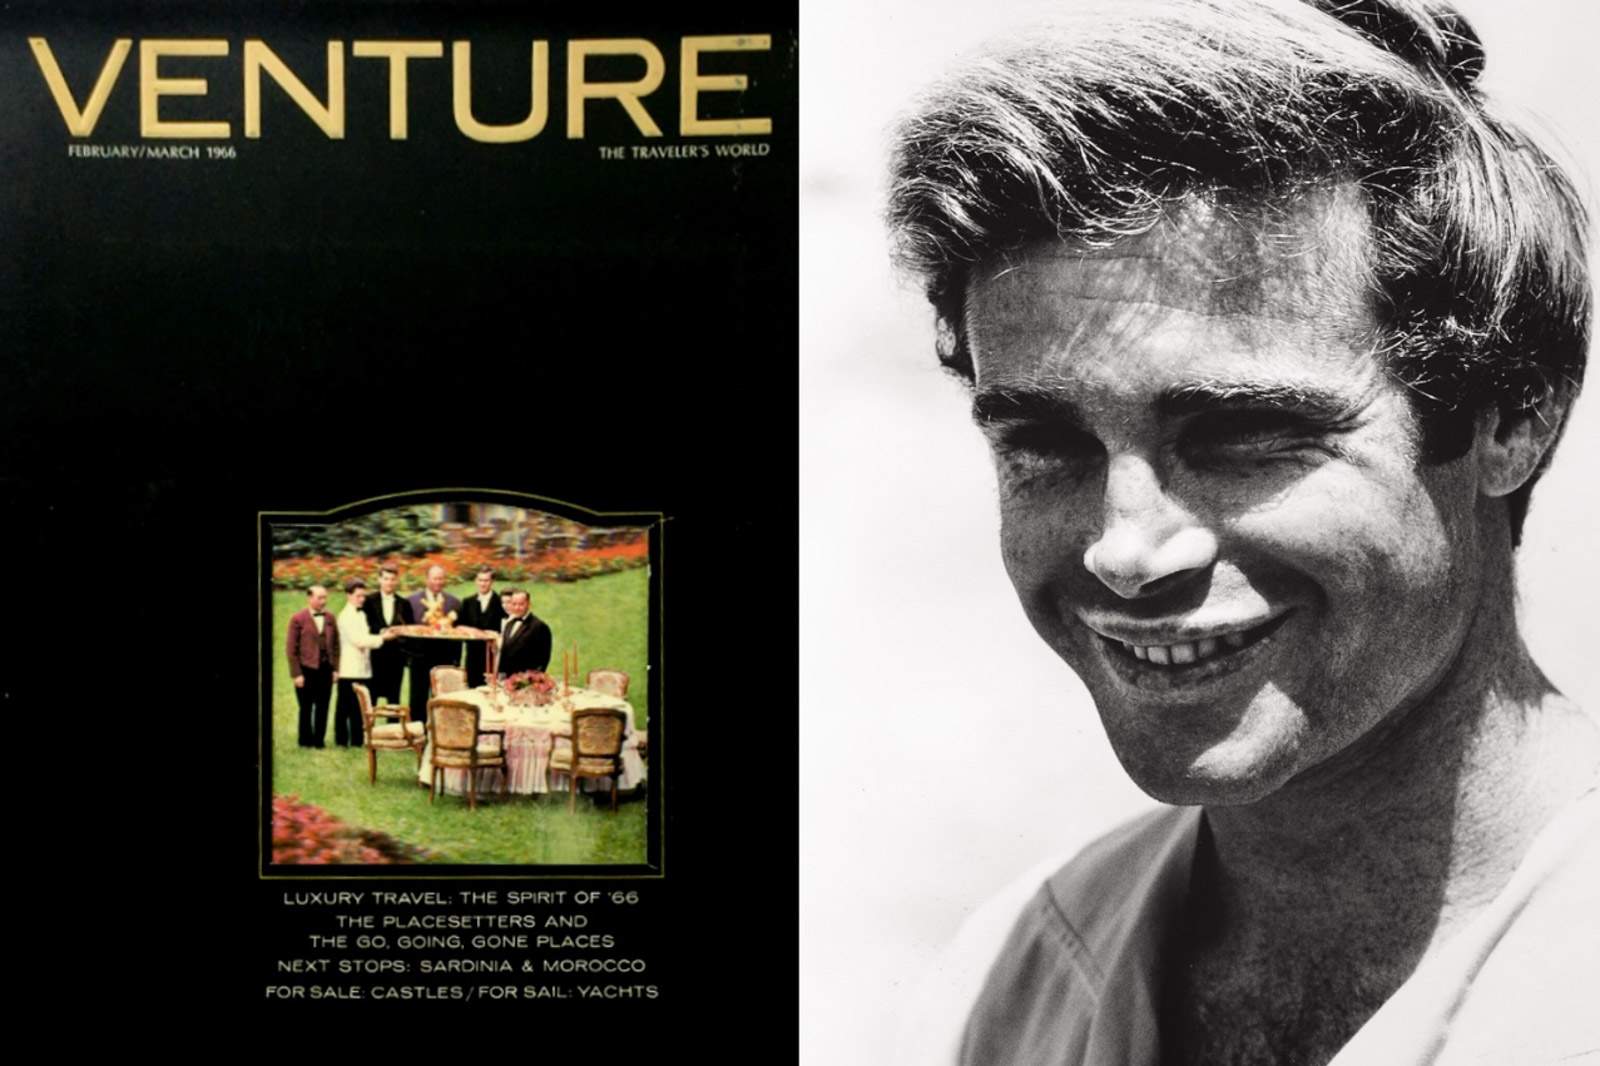 MAN ON A PERMANENT VACATION, JOHNNY FAIN PROFILE IN VENTURE MAGAZINE  (1966)